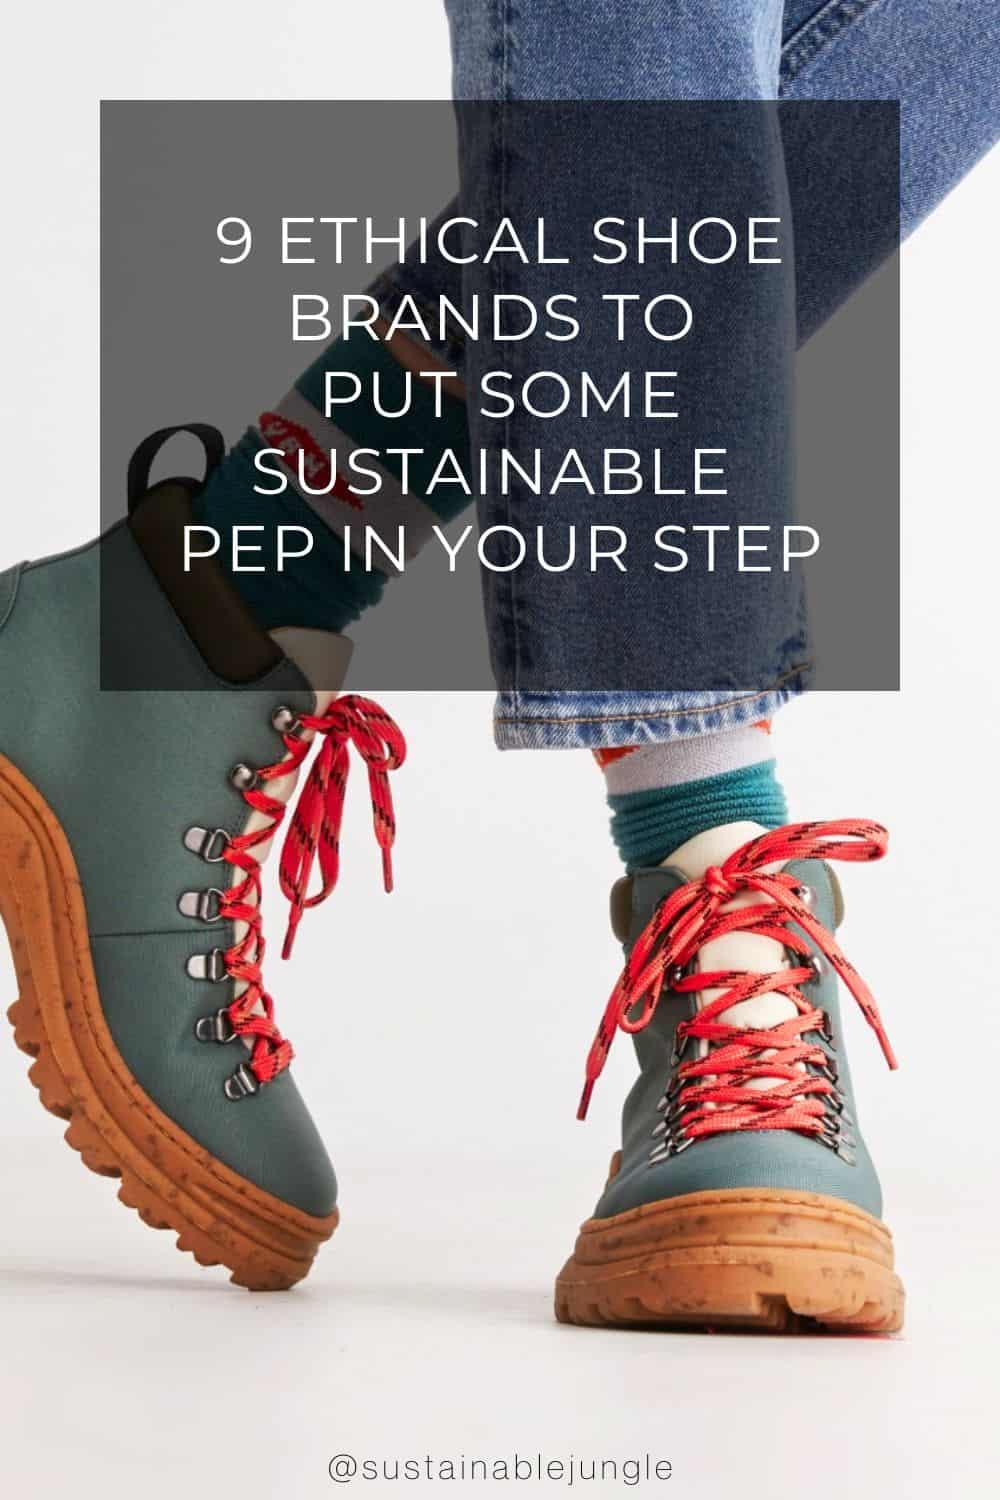 9 Ethical Shoe Brands To Put Some Sustainable Pep In Your Step Image by Thesus #ethicalshoebrands #ethicalshoes #bestethicalshoes #sustainableethicalshoes #ethicallymadeshoes #ethicalfootwear #sustainablejungle